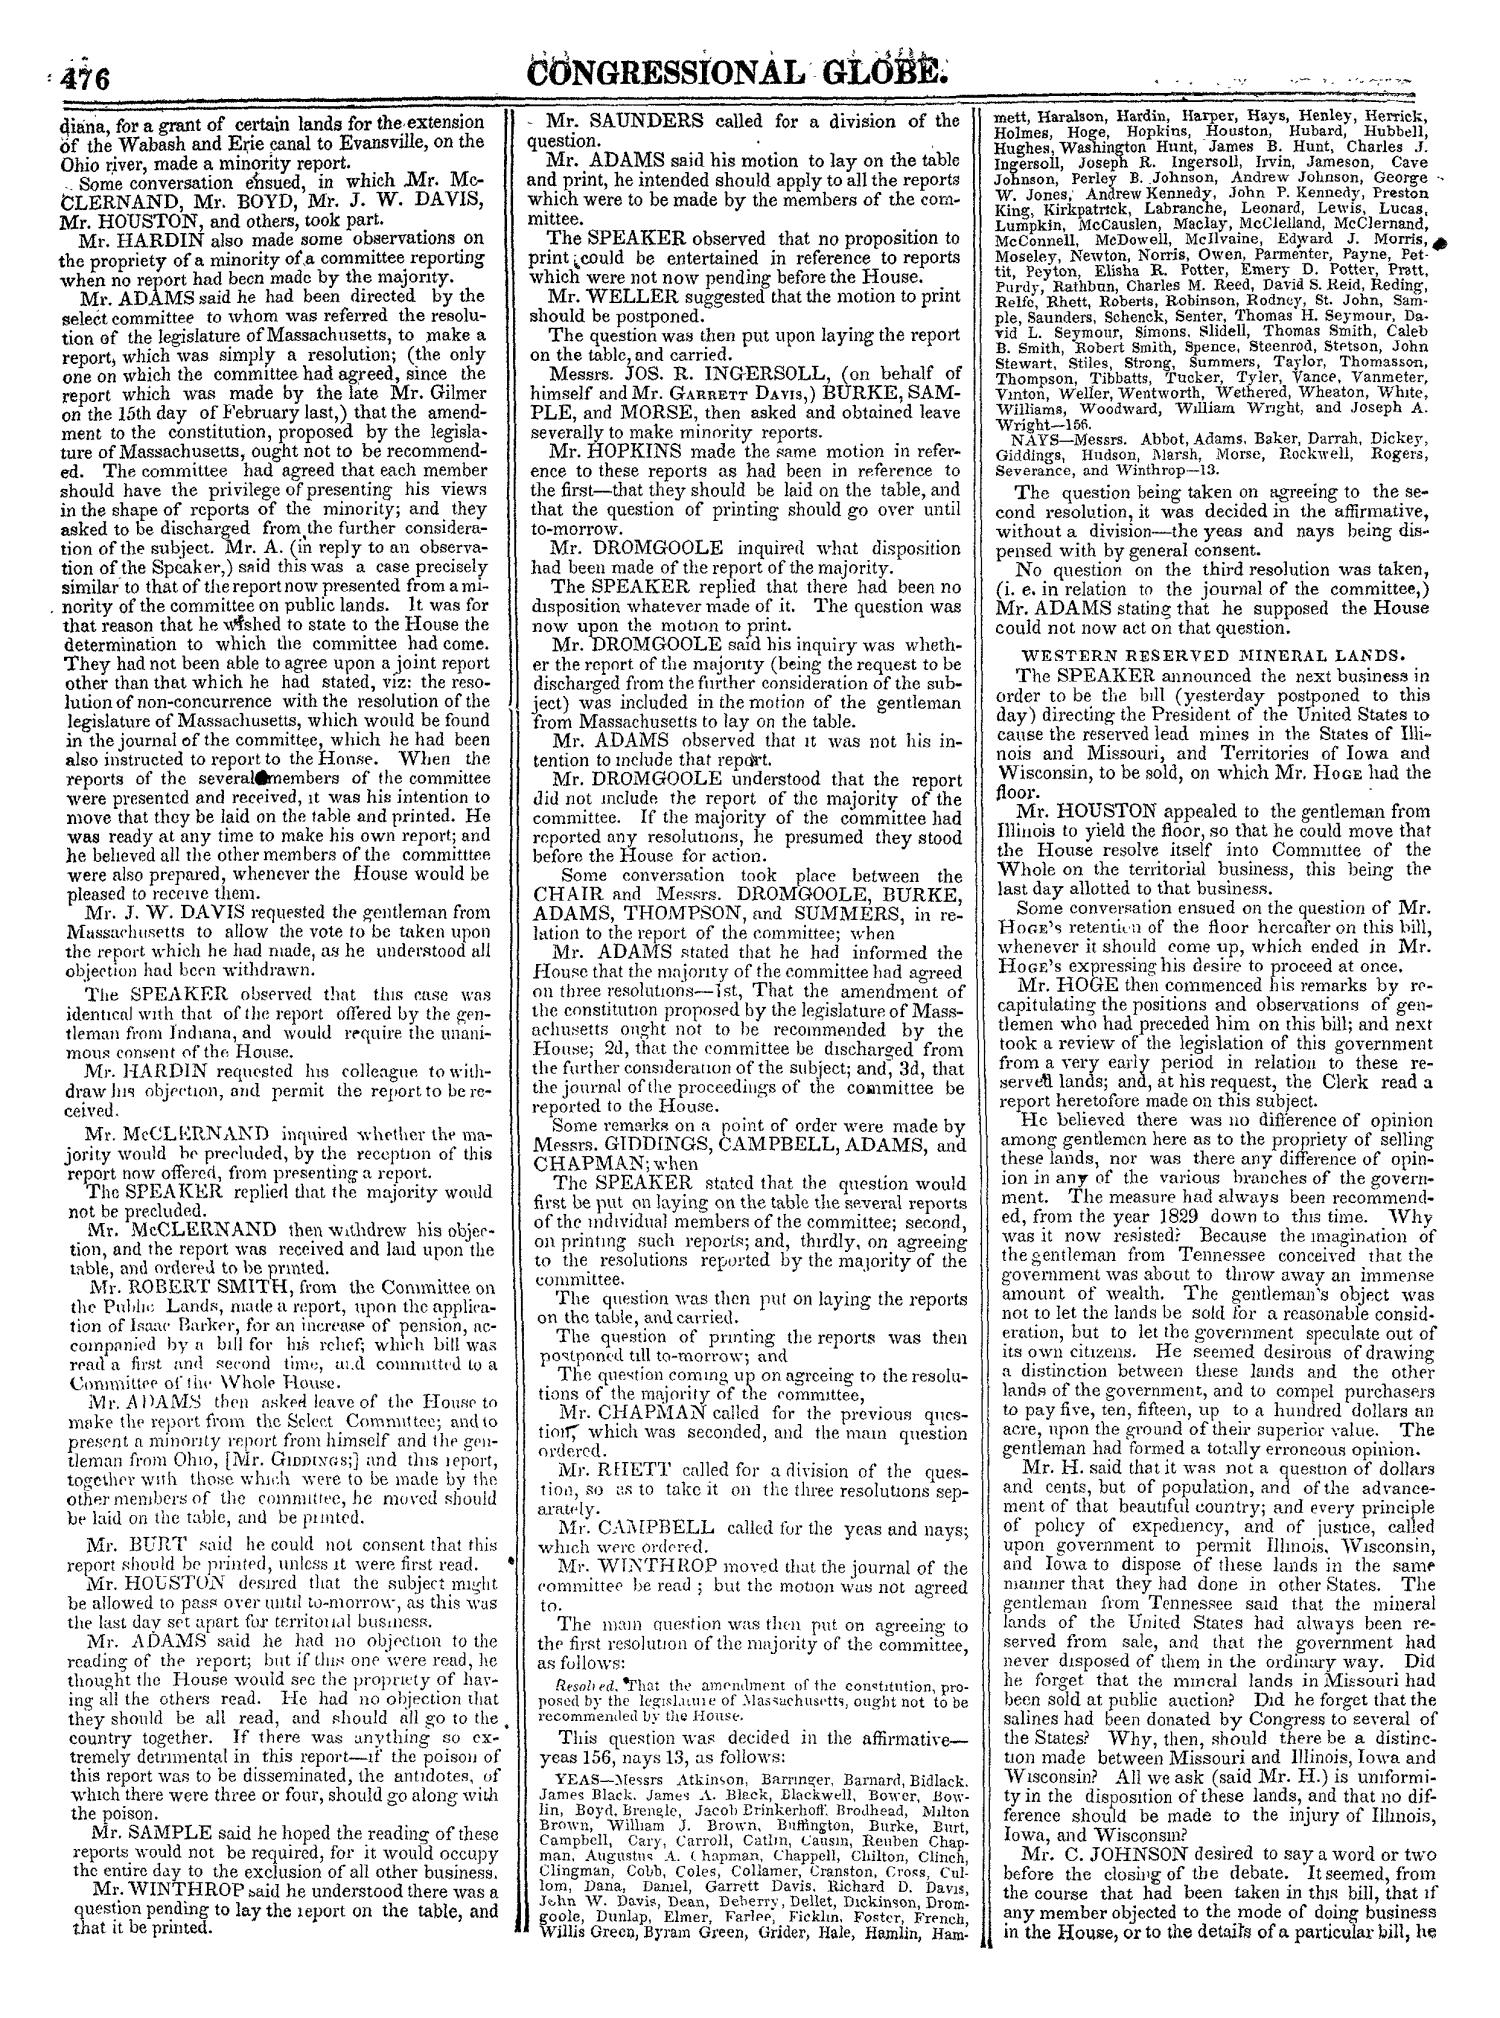 The Congressional Globe, Volume 13, Part 1: Twenty-Eighth Congress, First Session
                                                
                                                    476
                                                